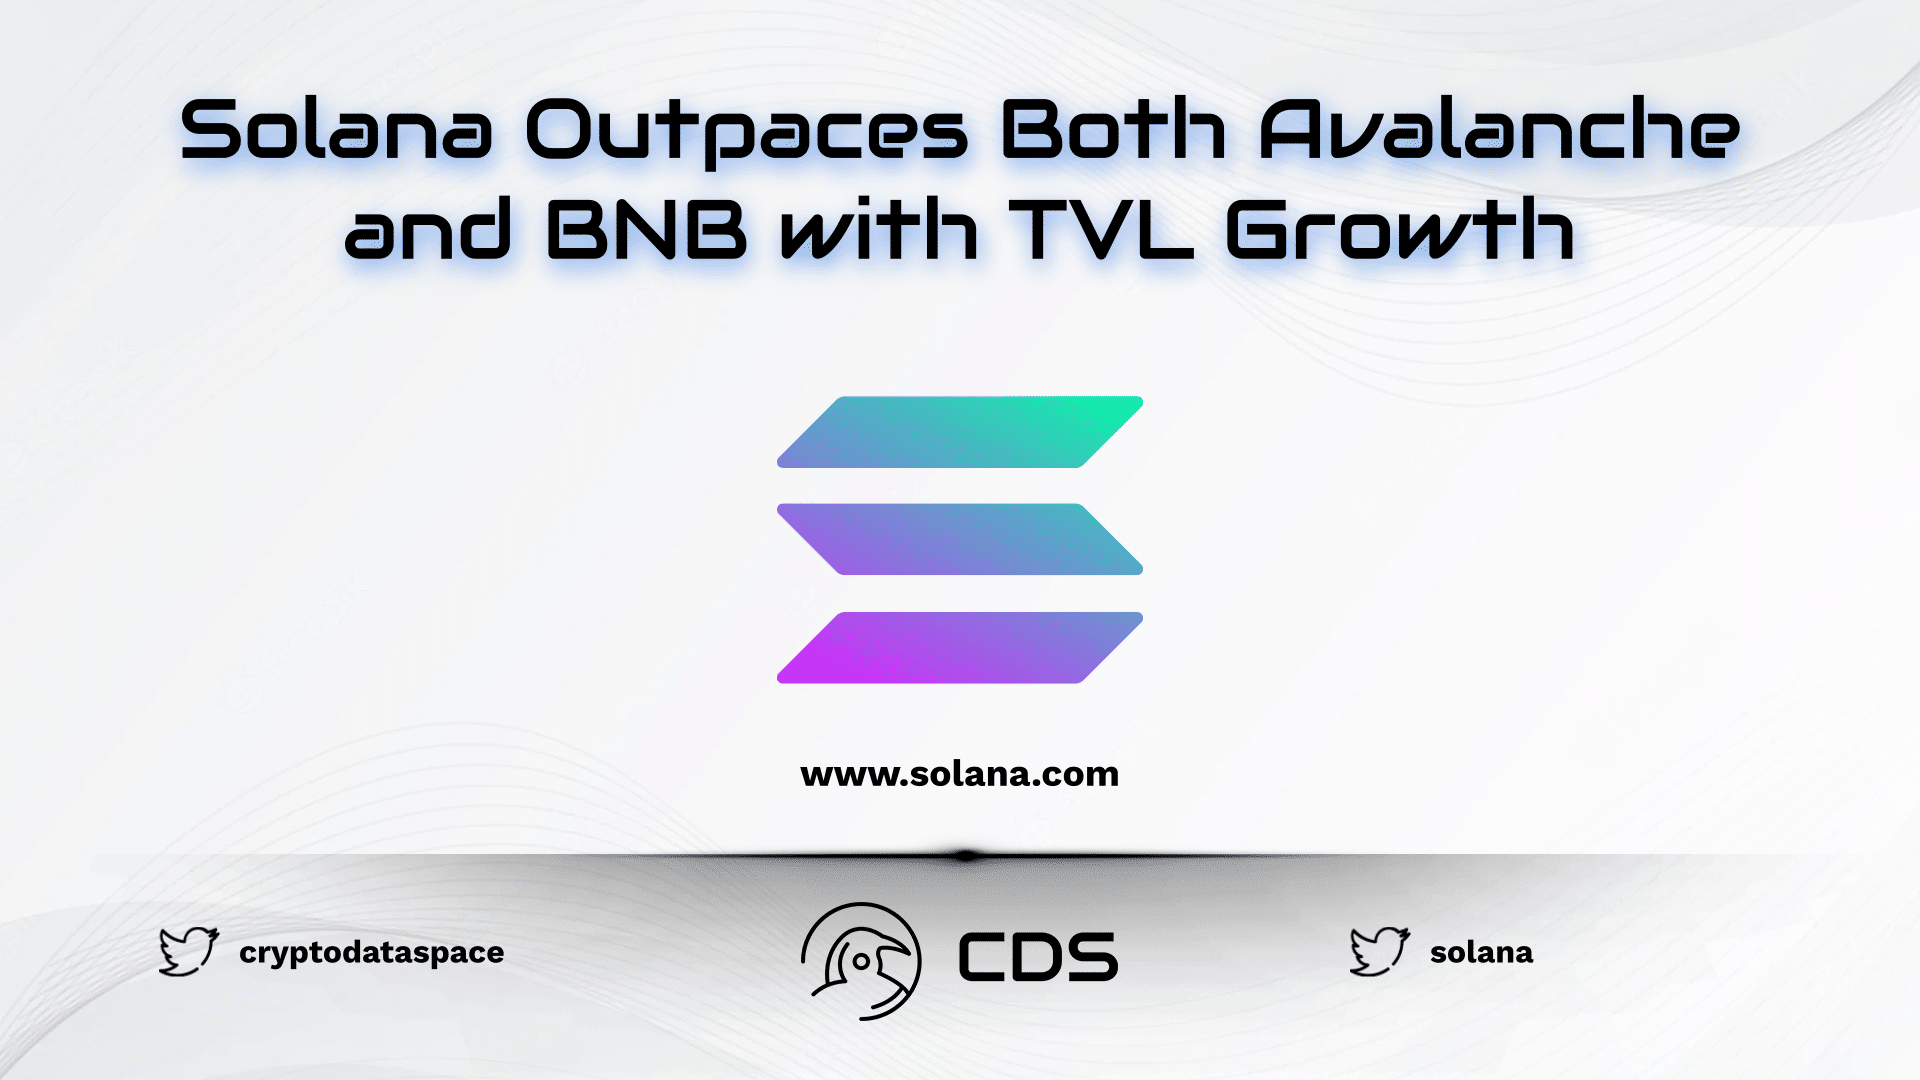 Solana Outpaces Both Avalanche and BNB with TVL Growth